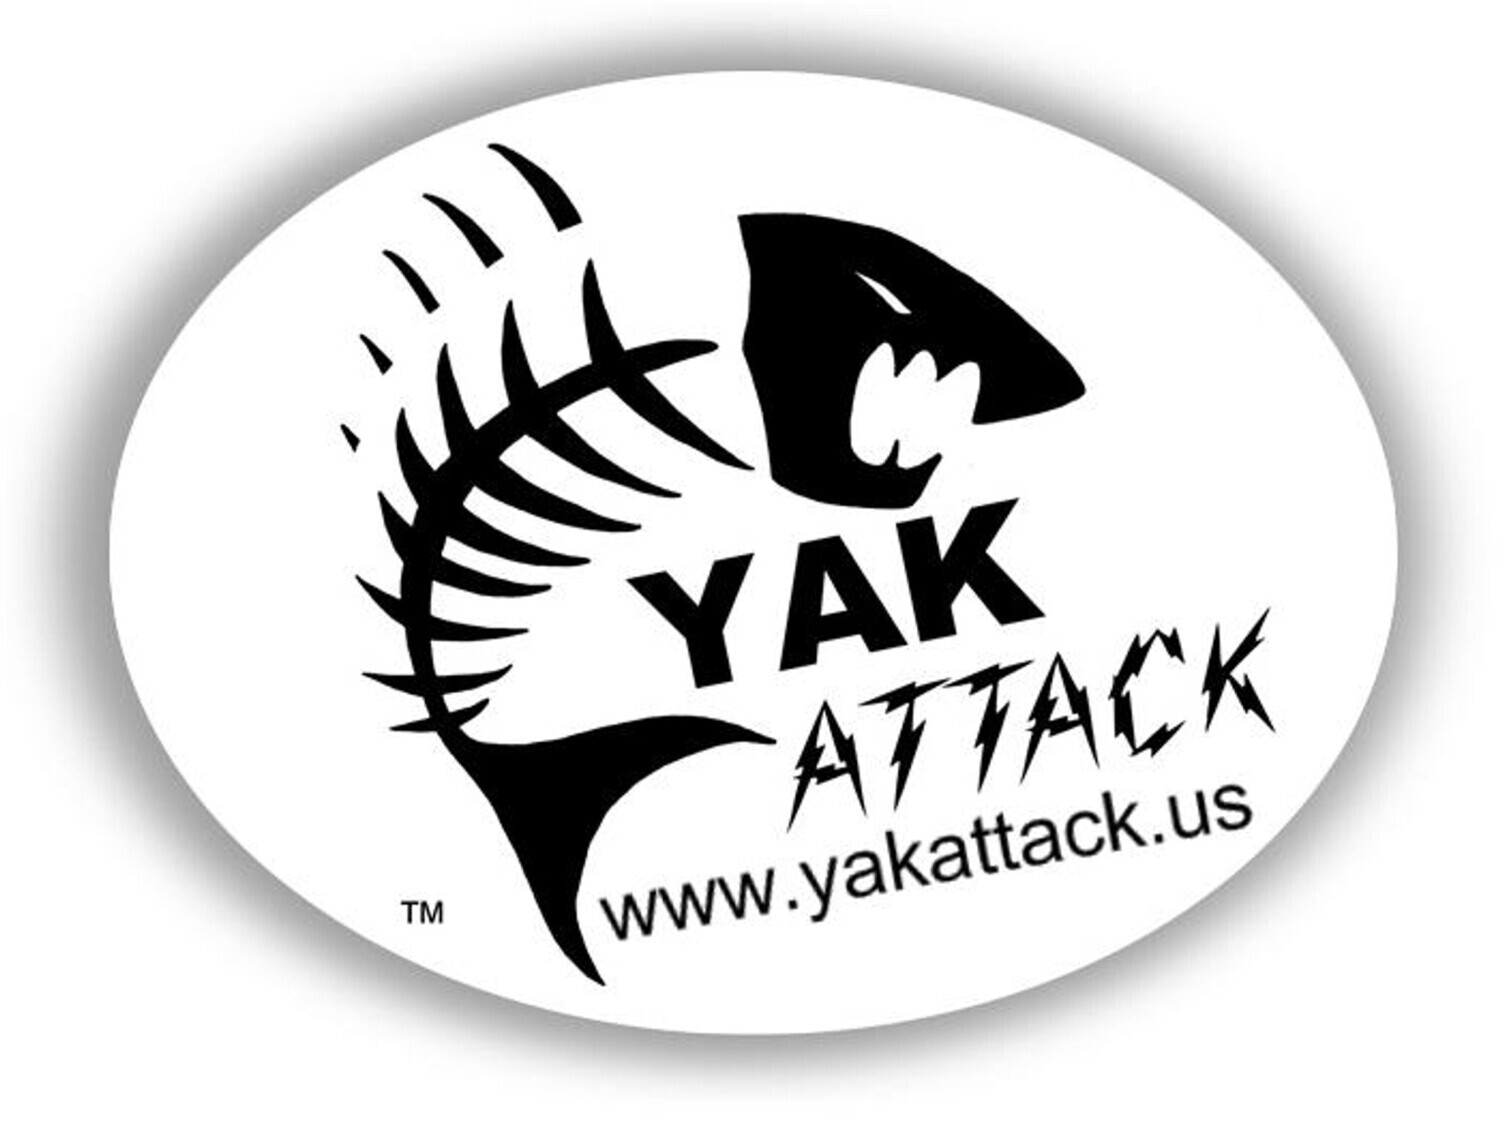 YakAttack Throwback Oval Decal